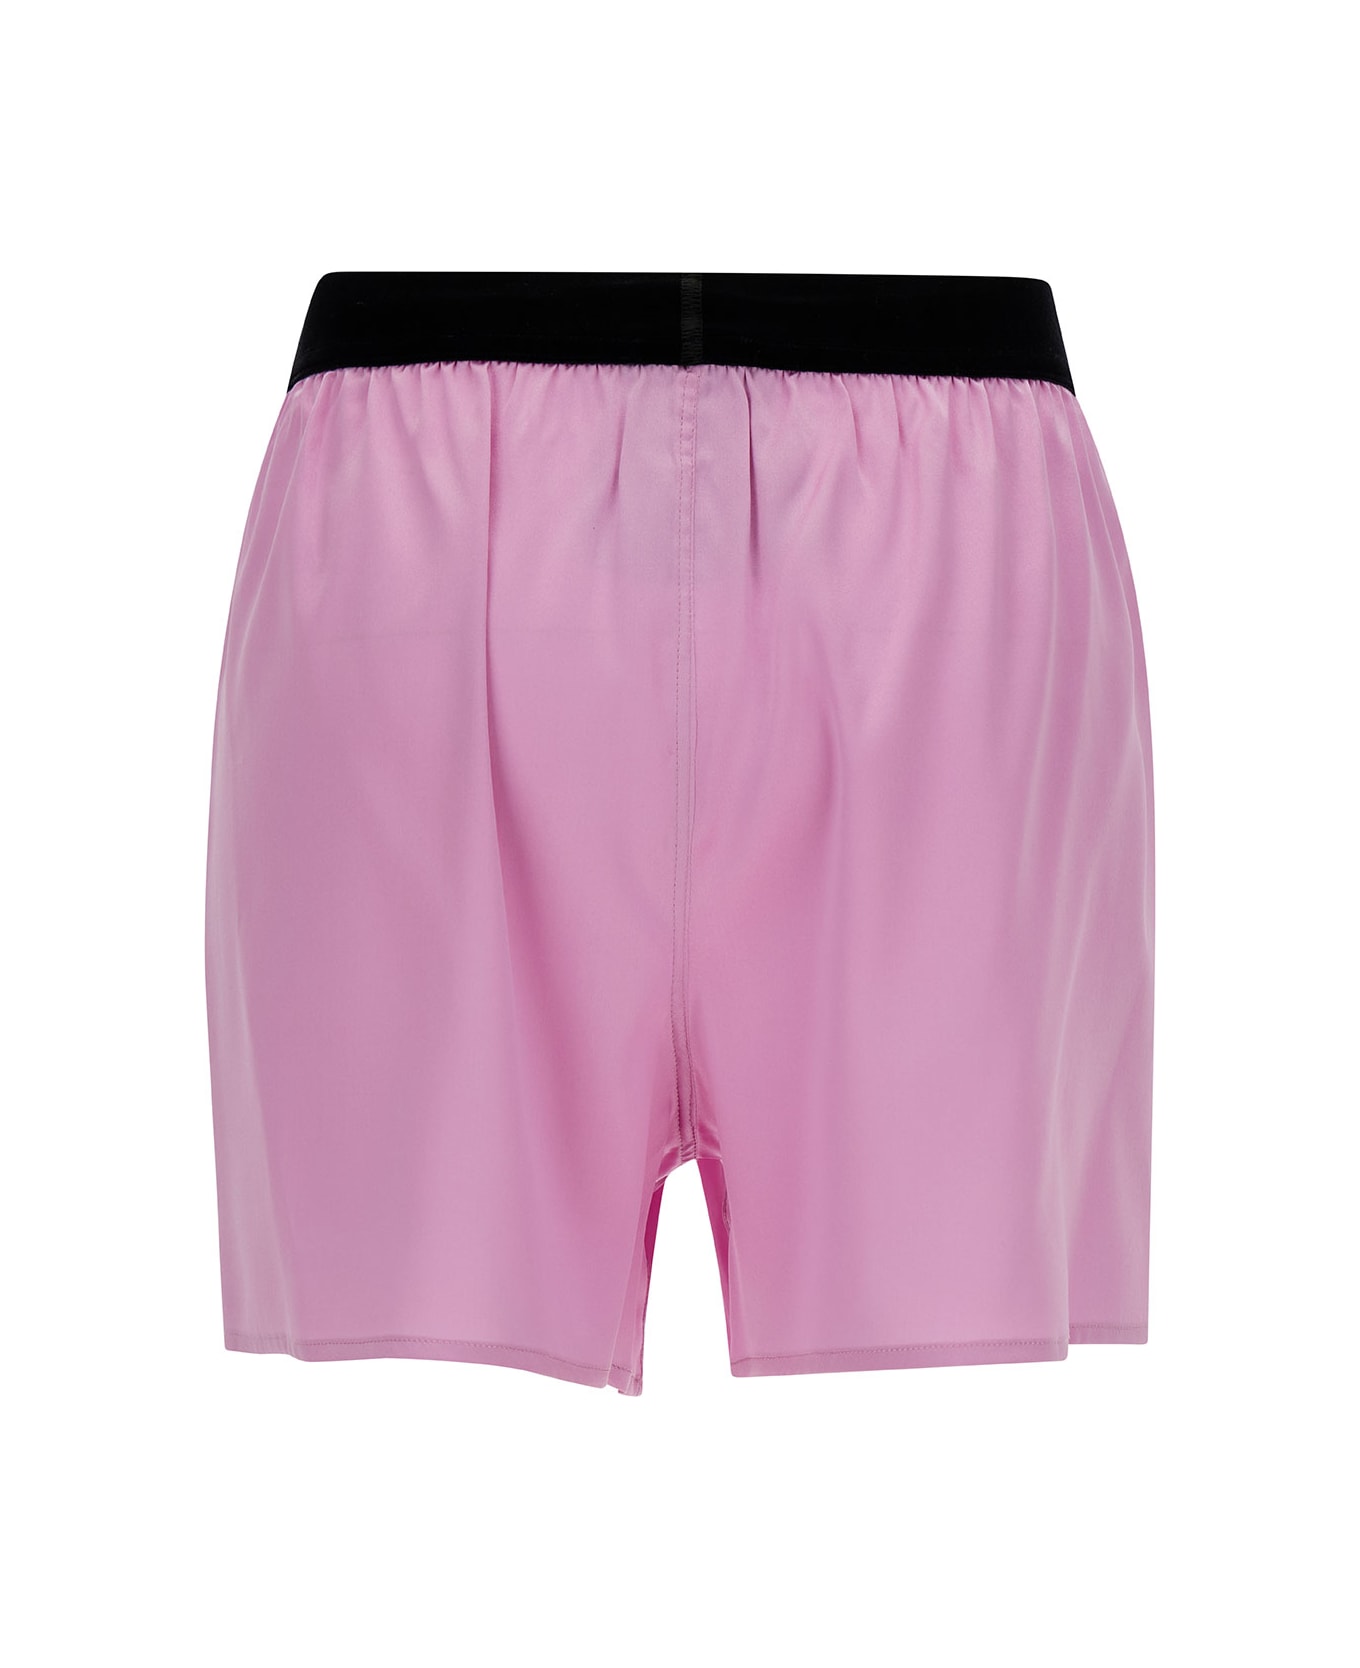 Tom Ford Pink Satin Shorts With Logo On Waistband In Stretch Silk Woman - Pink